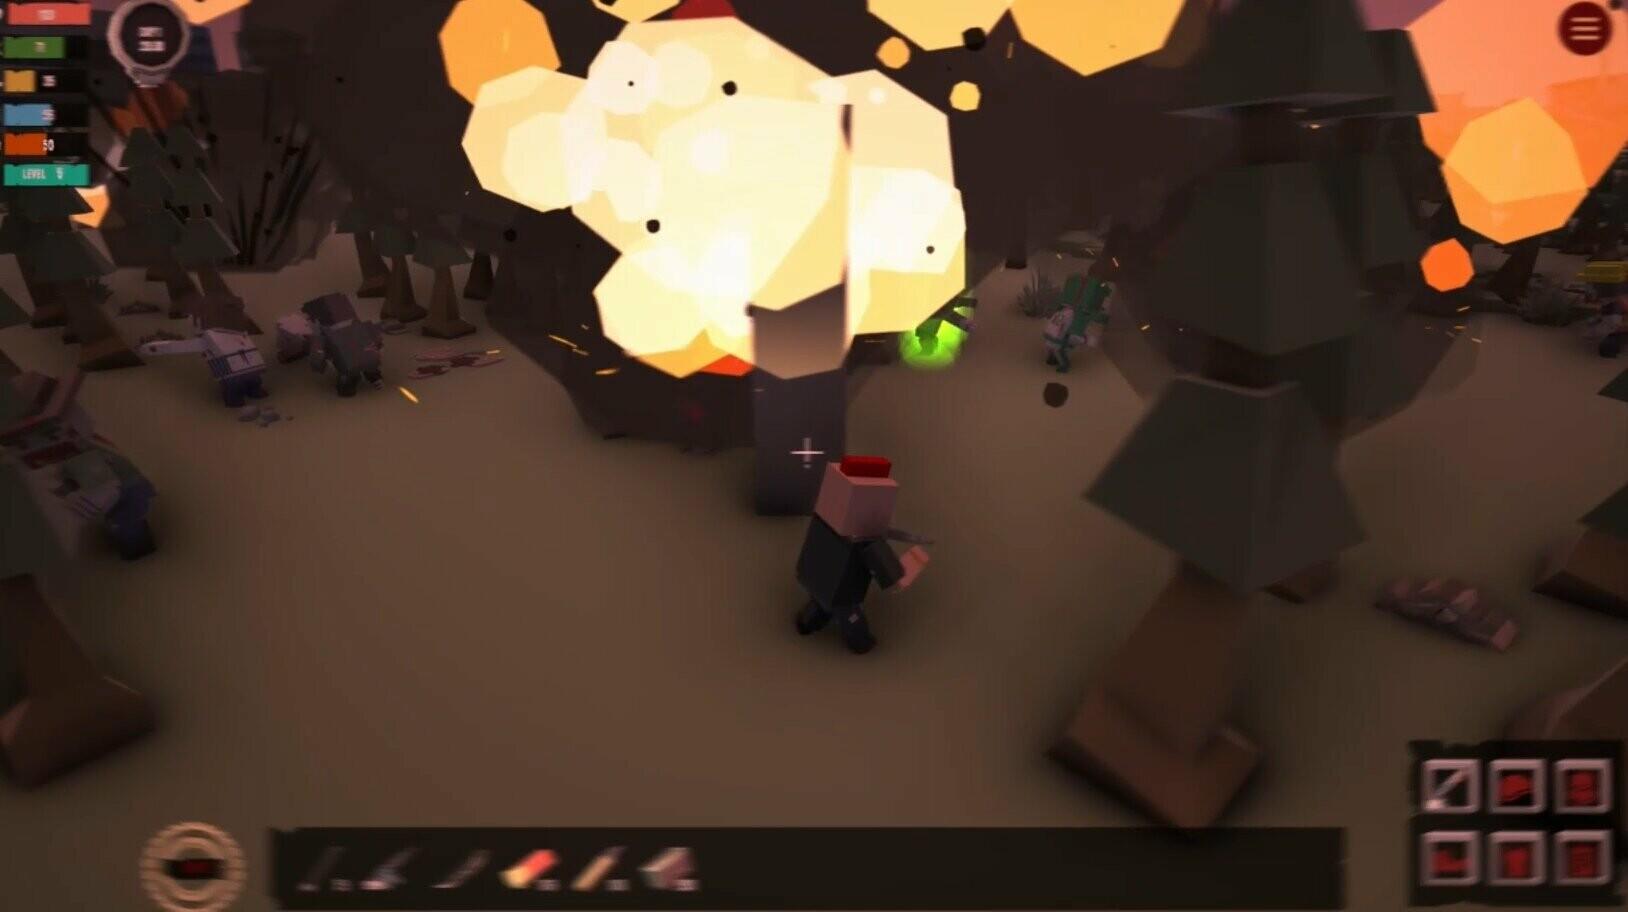 Screenshot 1 of The Fight: Aftermath 